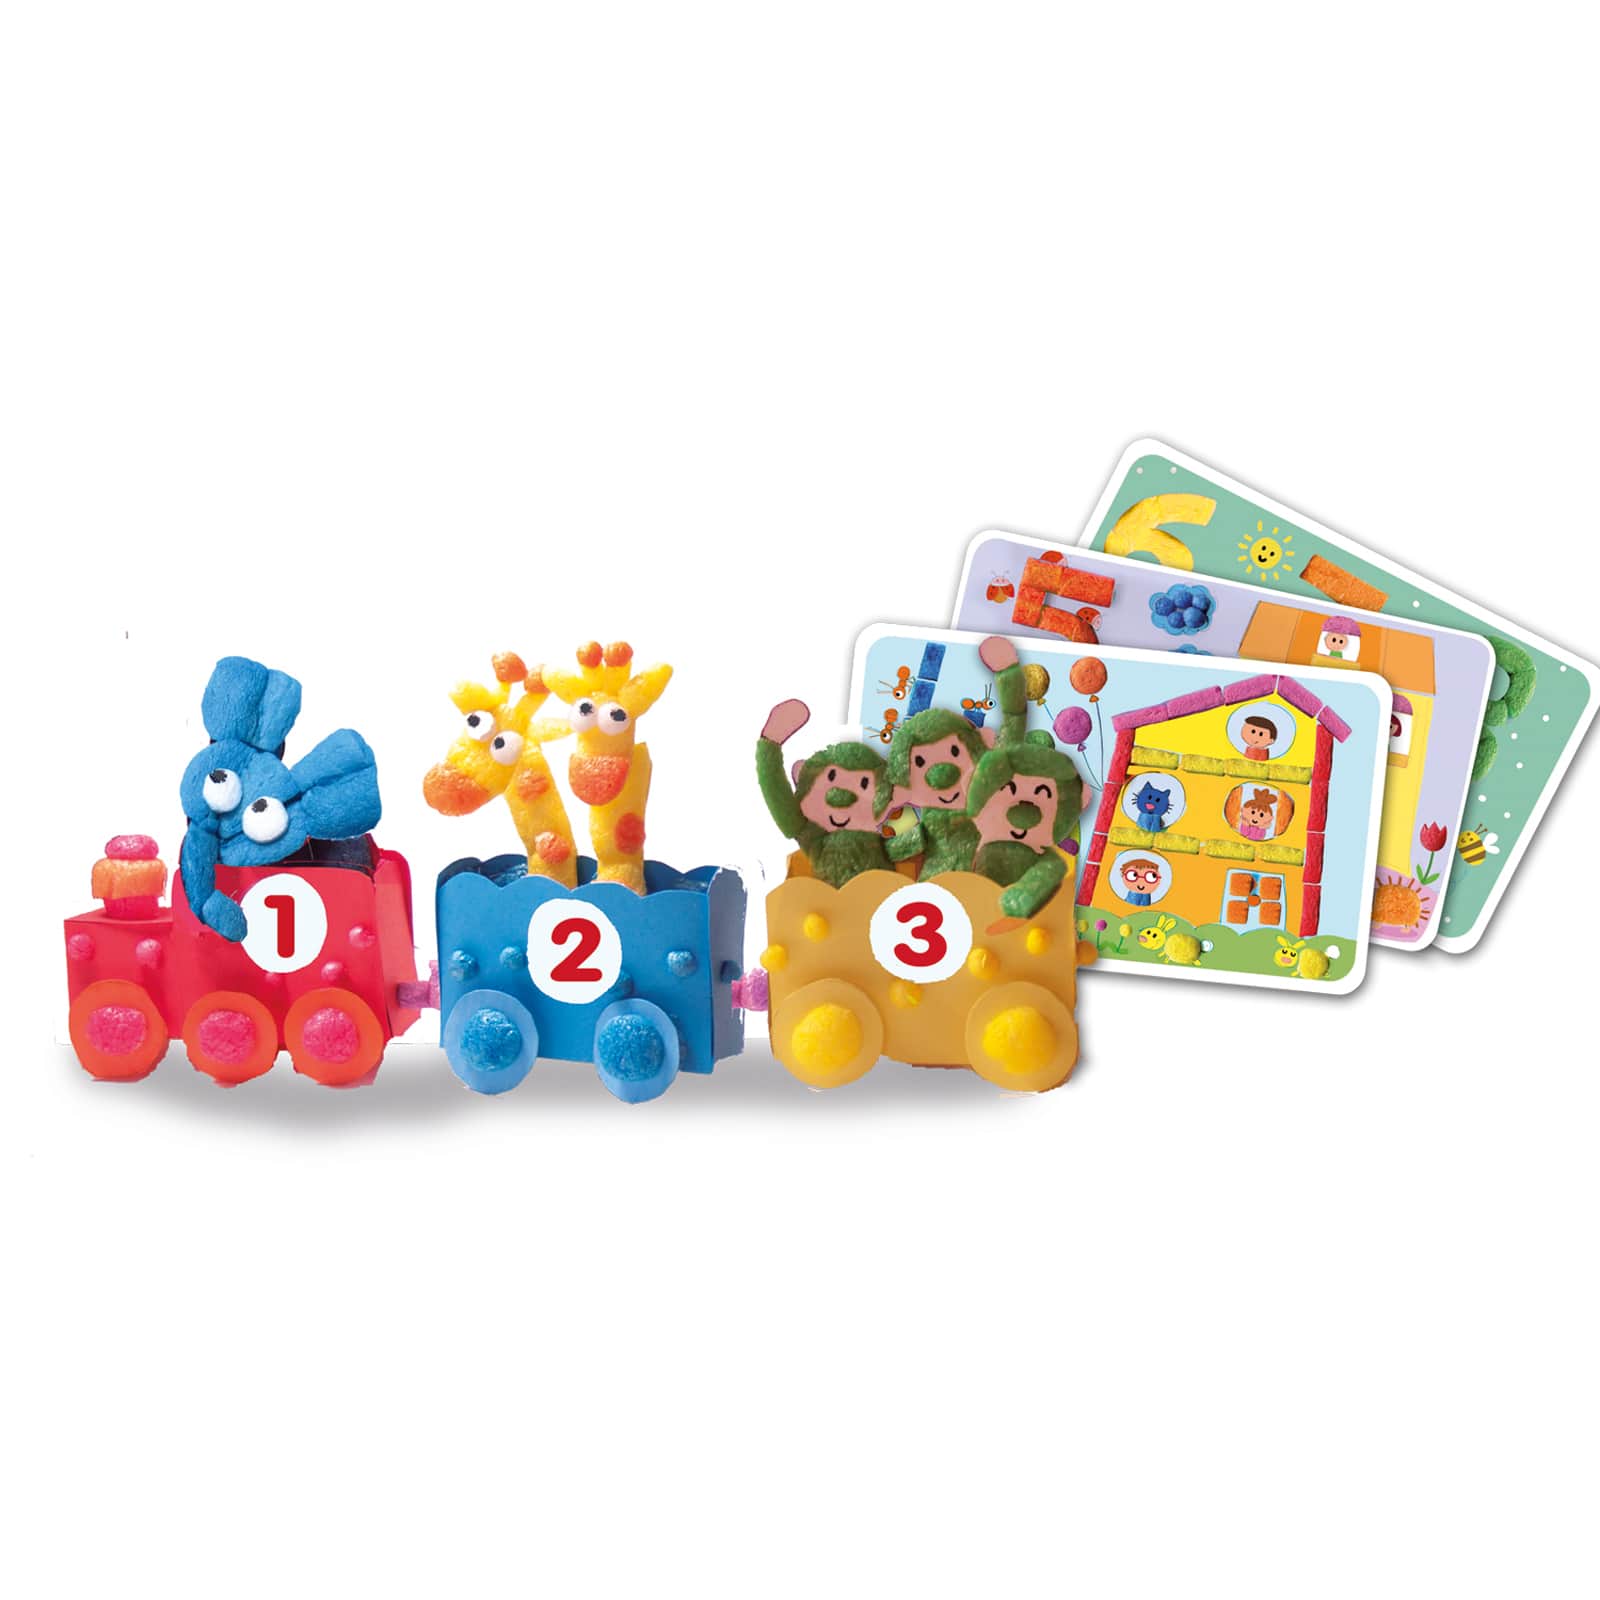 PlayMais&#xAE; Fun-to-Learn Numbers